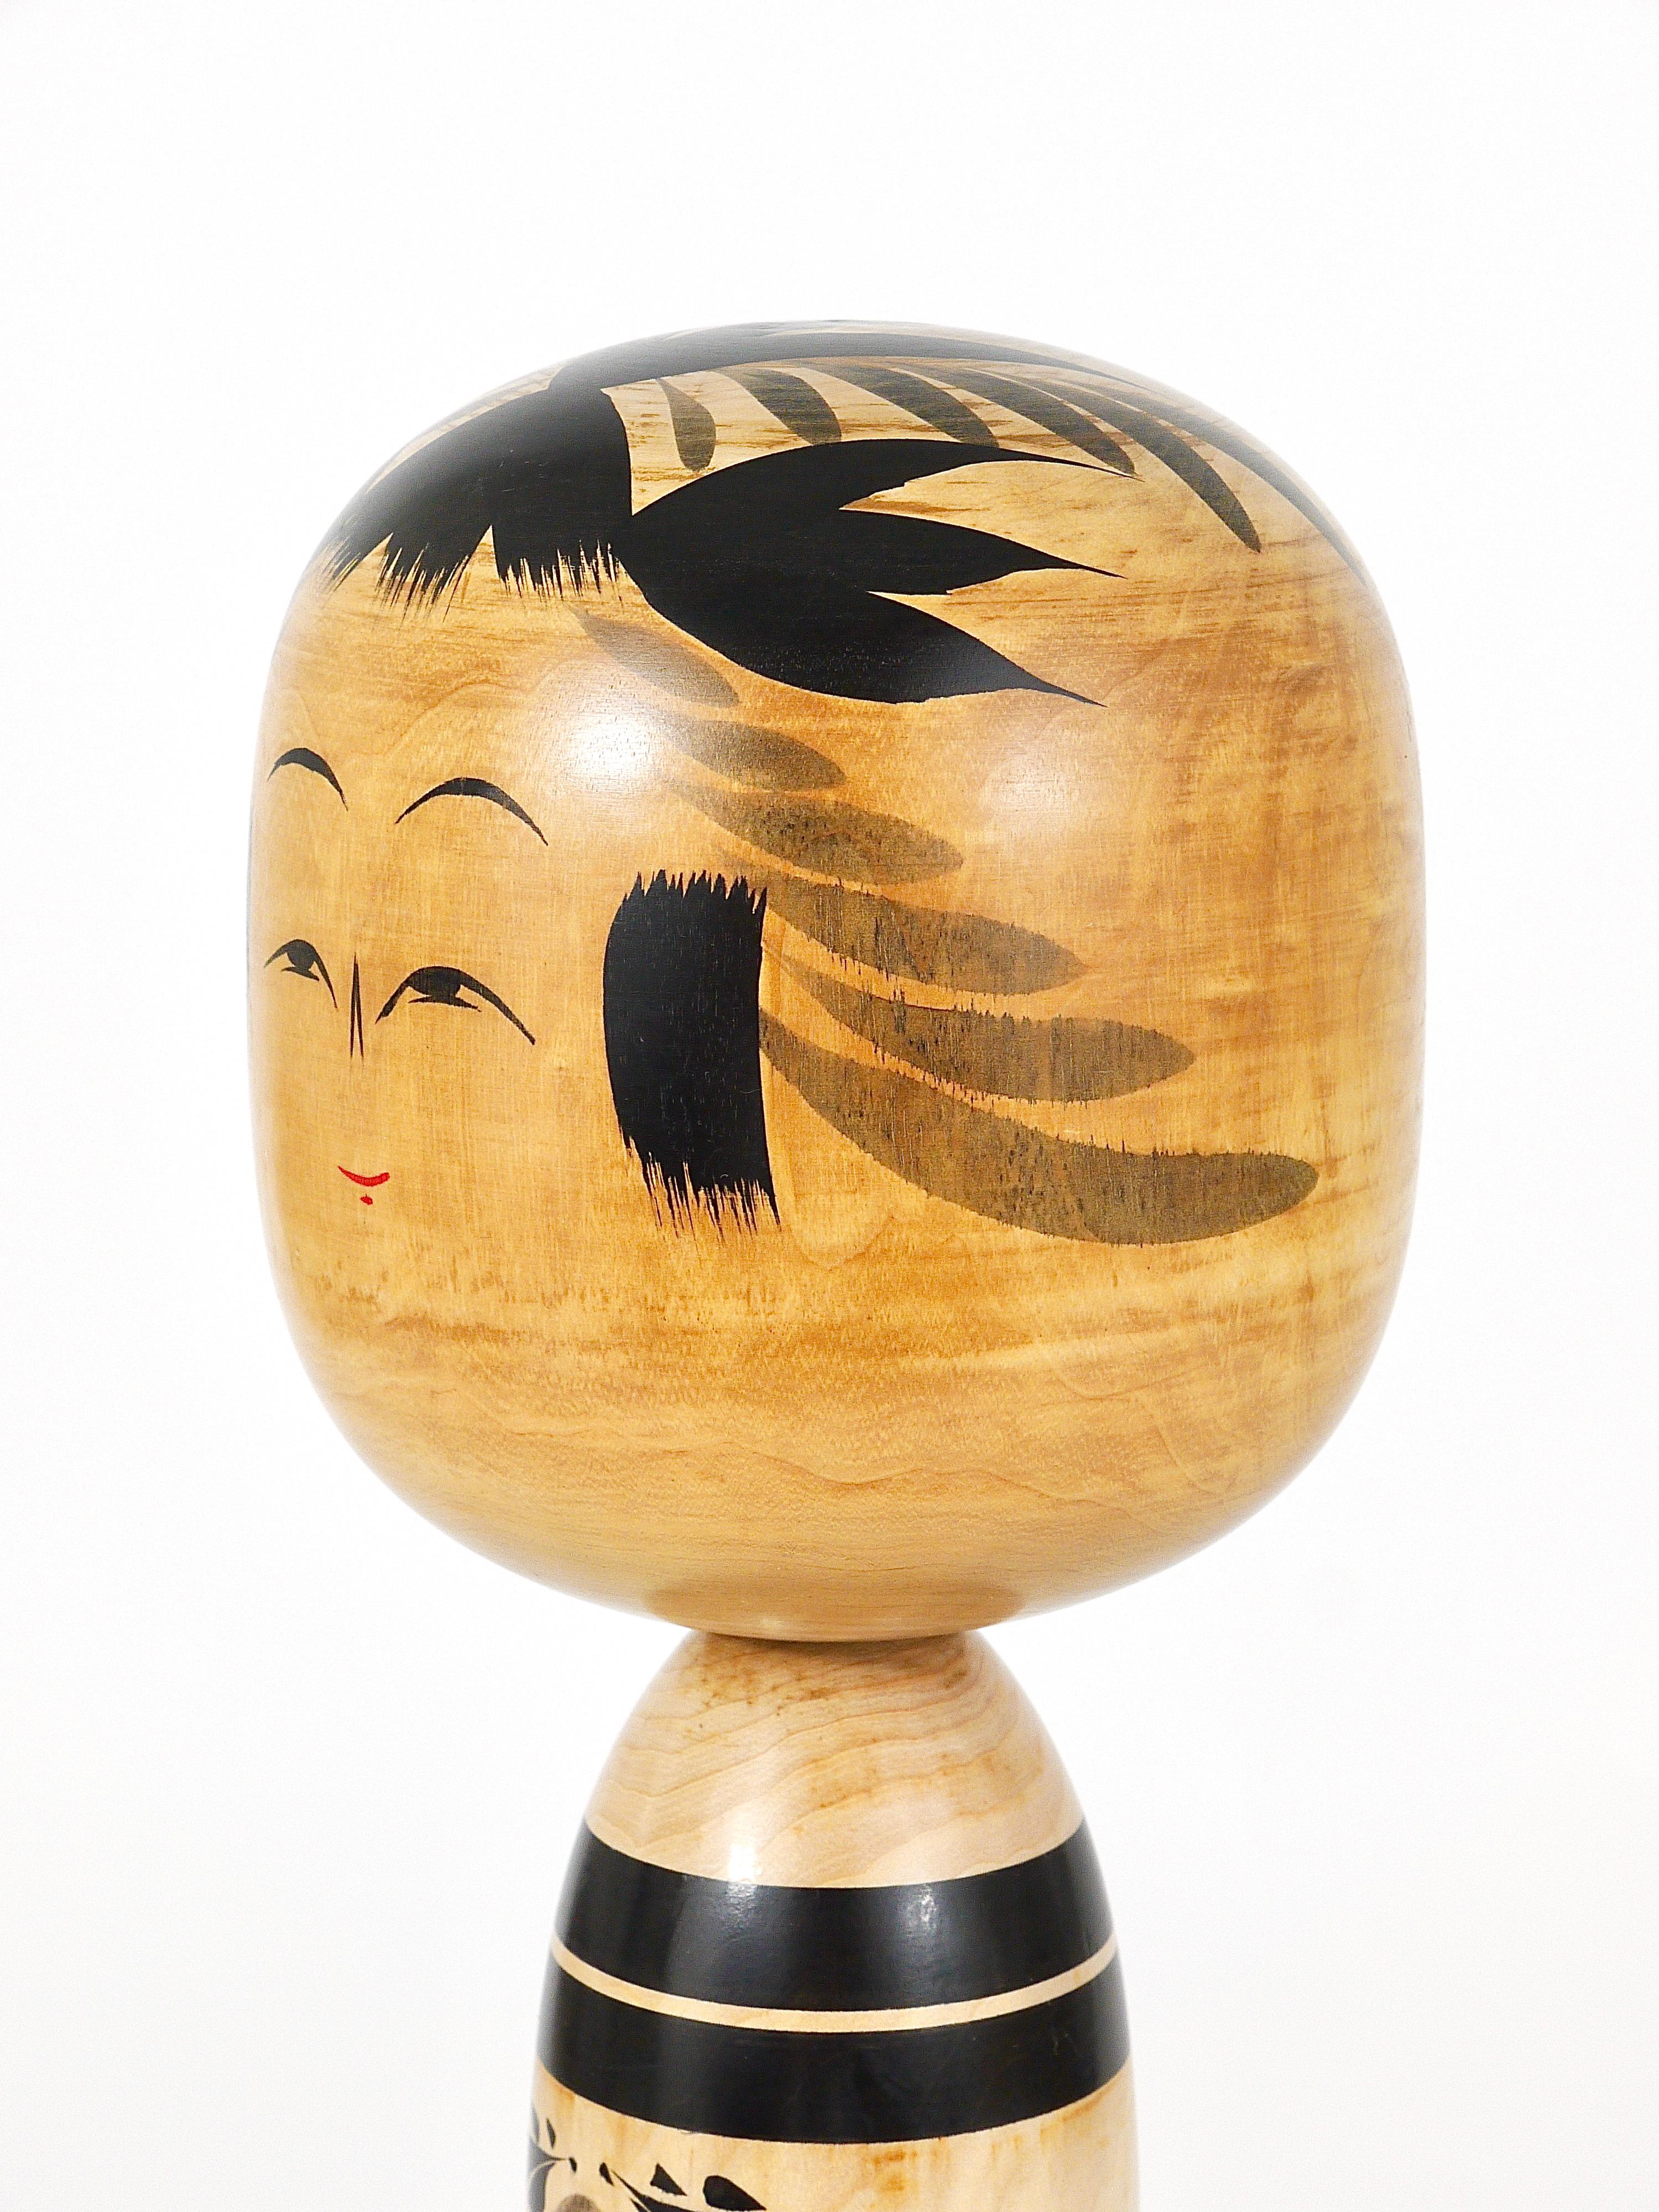 20th Century Decorative Togatta Kokeshi Doll Sculpture from Northern Japan, Hand-Painted For Sale